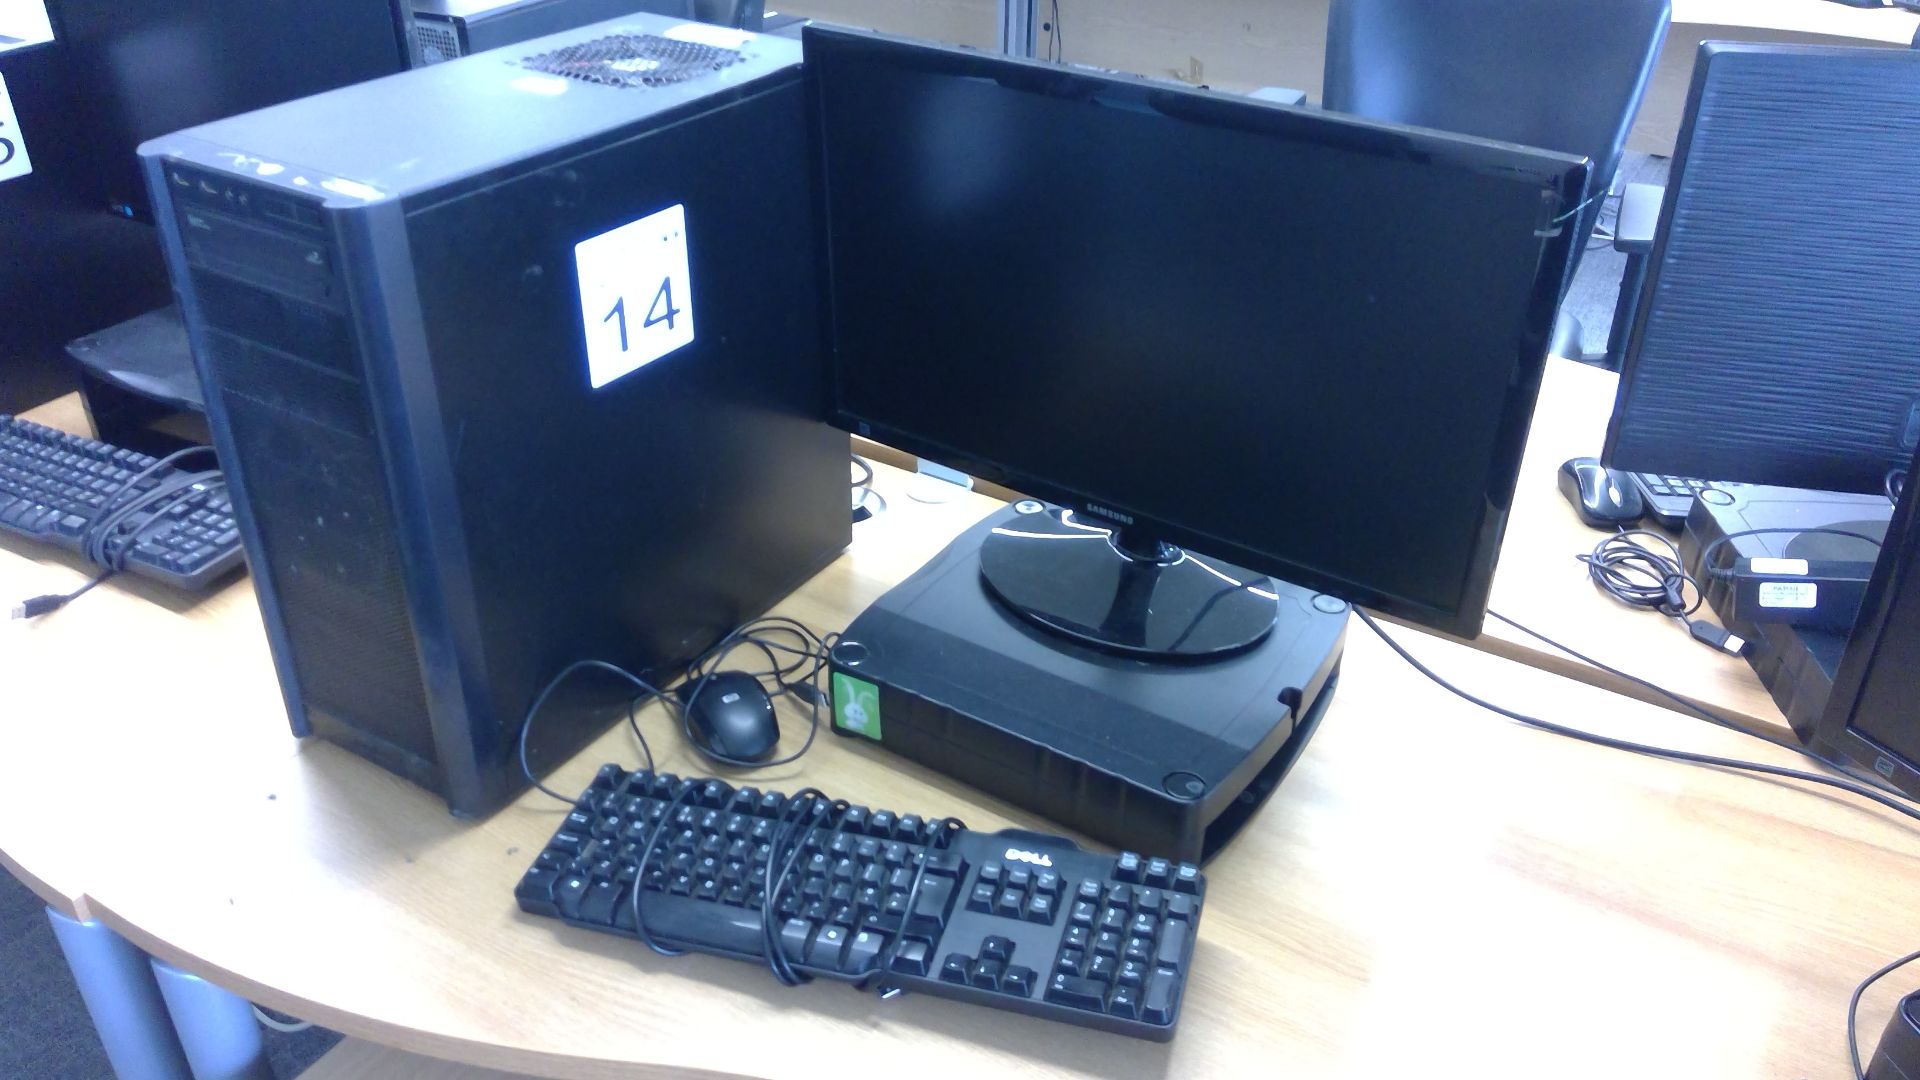 Antec PC complete with Samsung 24 inch monitor, keyboard and mouse